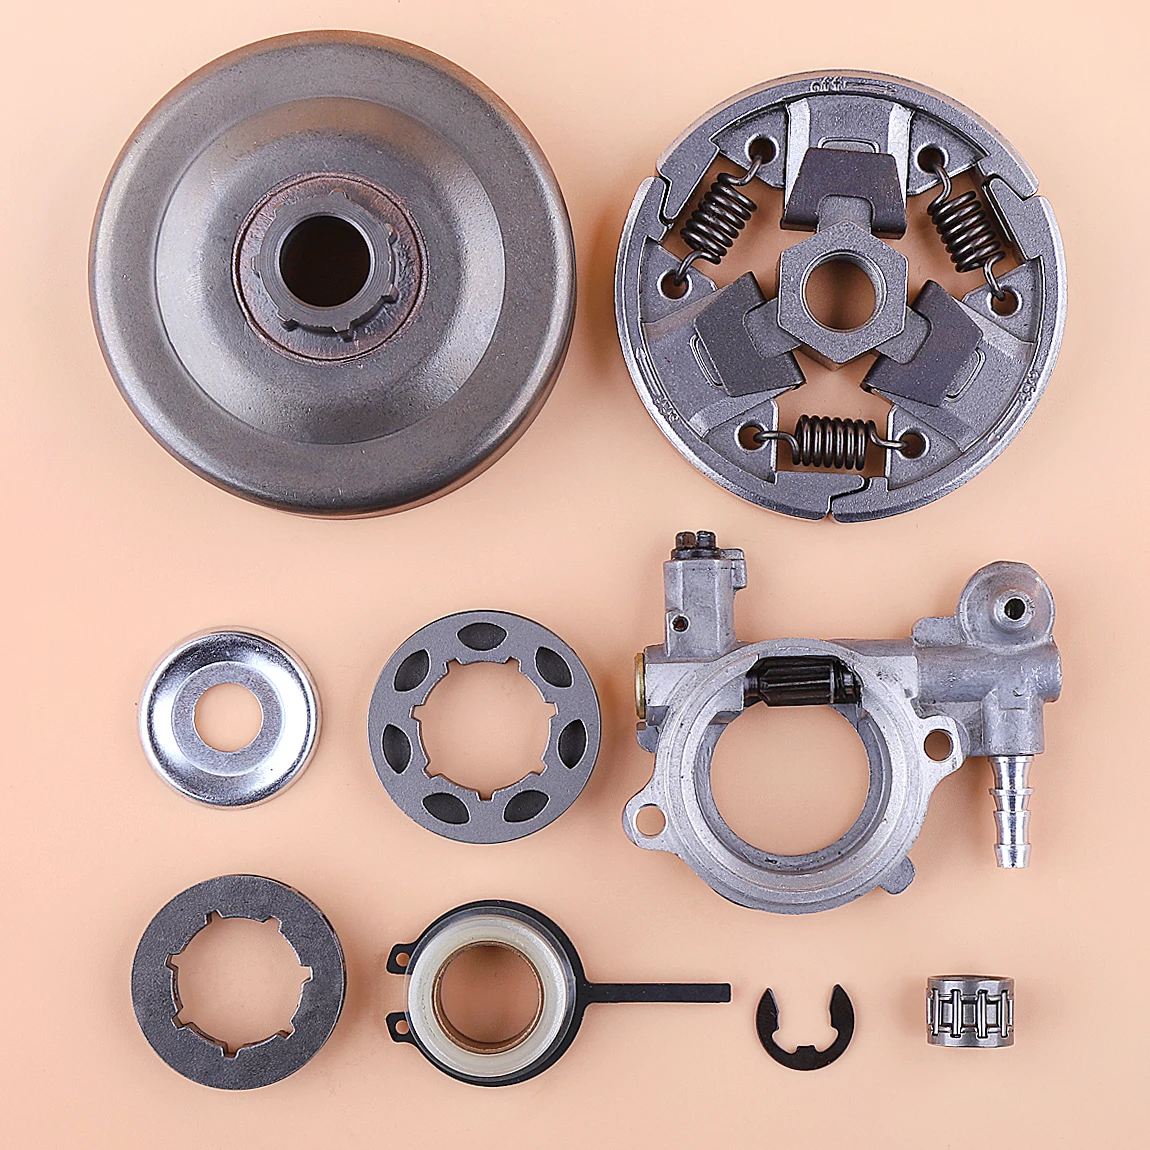 

3/8" 7T Clutch Drum Sprocket Rim Kit for Stihl 026 MS260 026PRO Chainsaw Oiler Oil Pump Replace 1121 640 7111 1121 007 1043